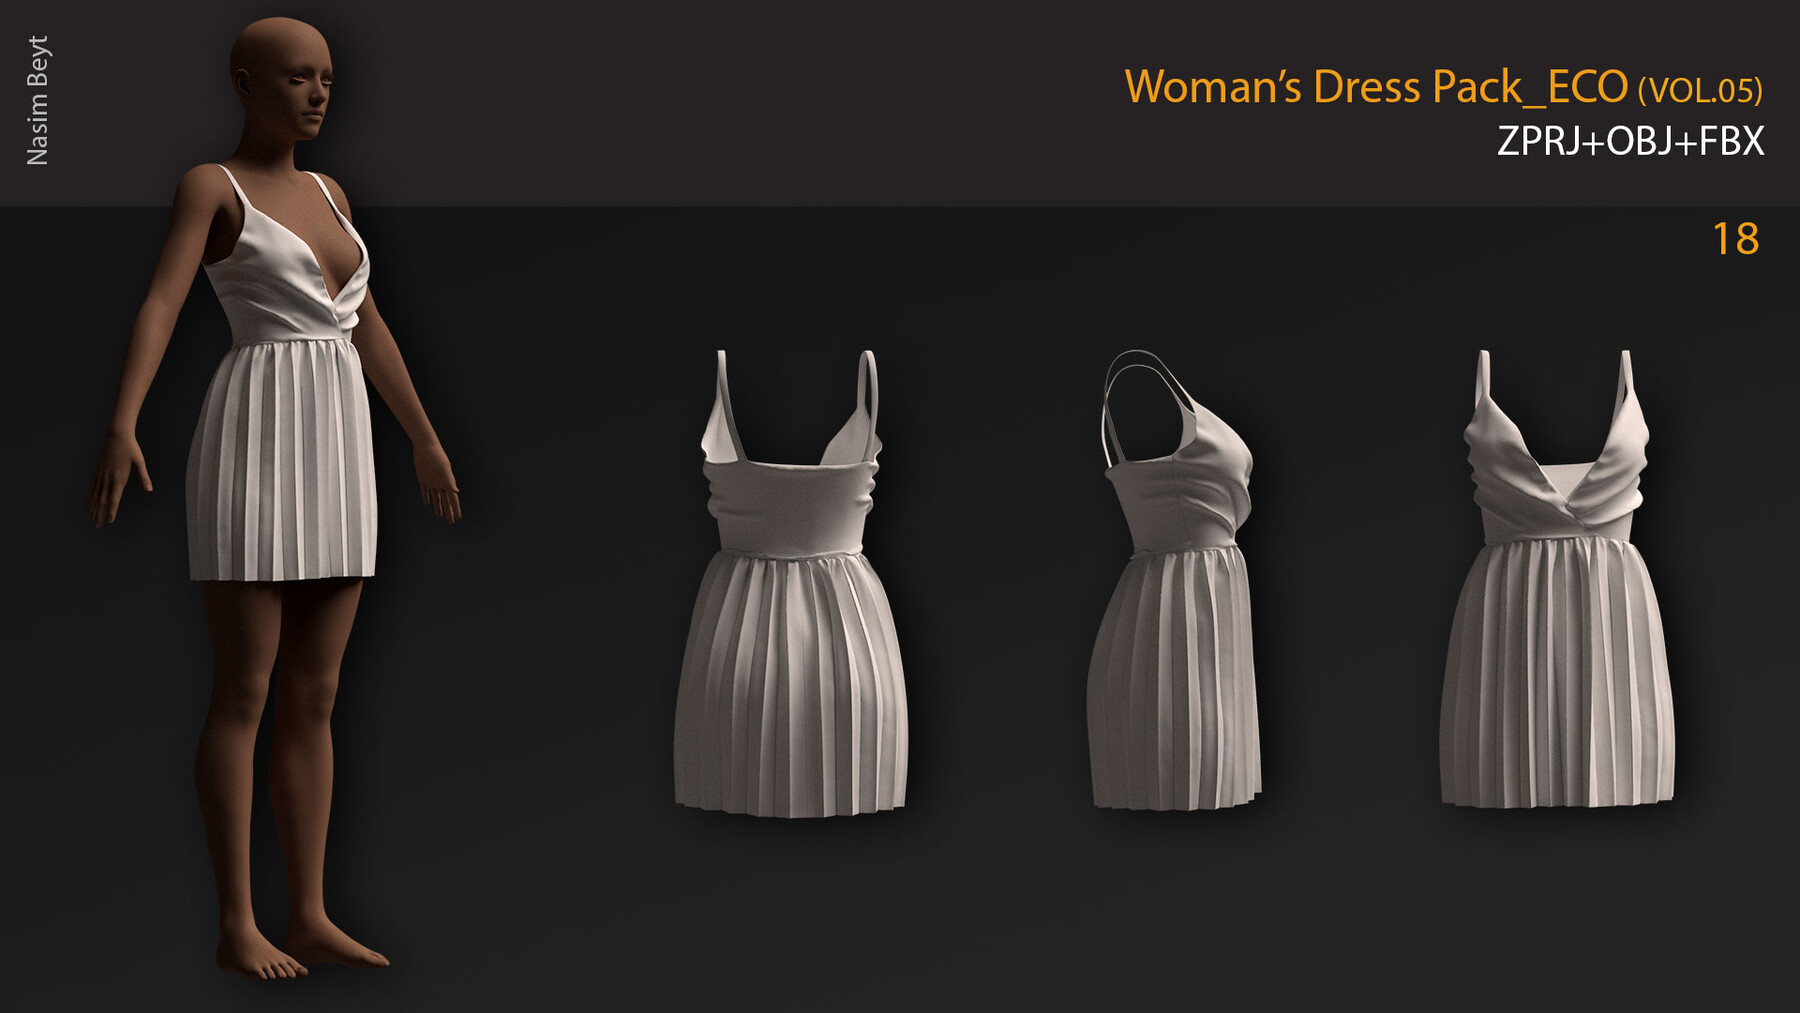 ArtStation - camping outfit pack (female/male outfit). CLO , MD  projects+FBX+OBJ